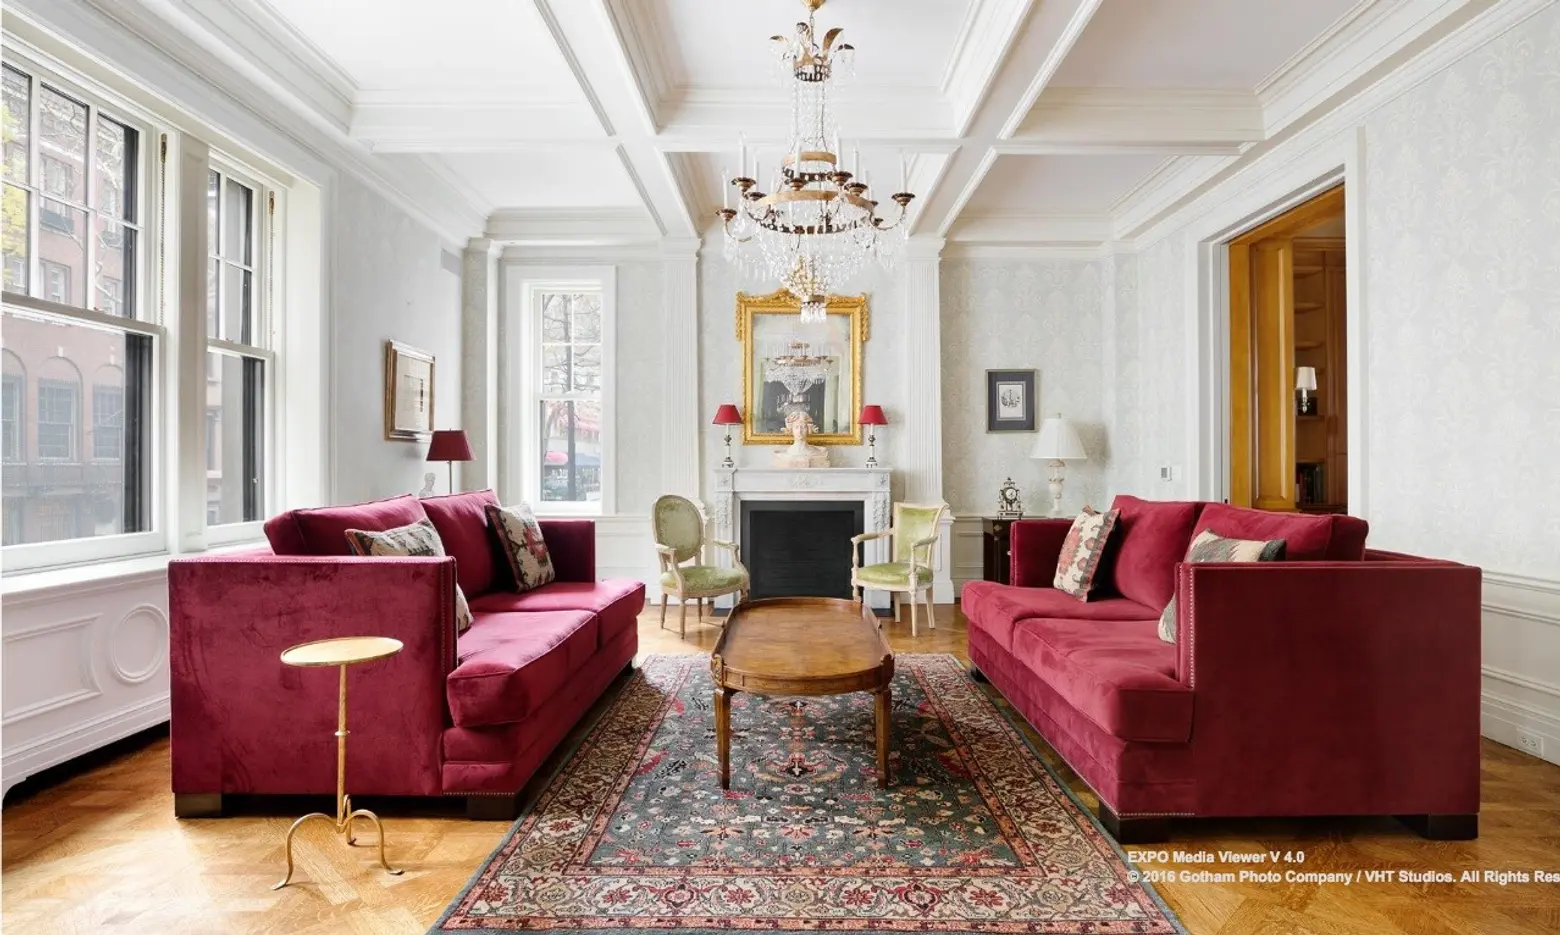 Price halved for an apartment in the building Barbara Walters once lived